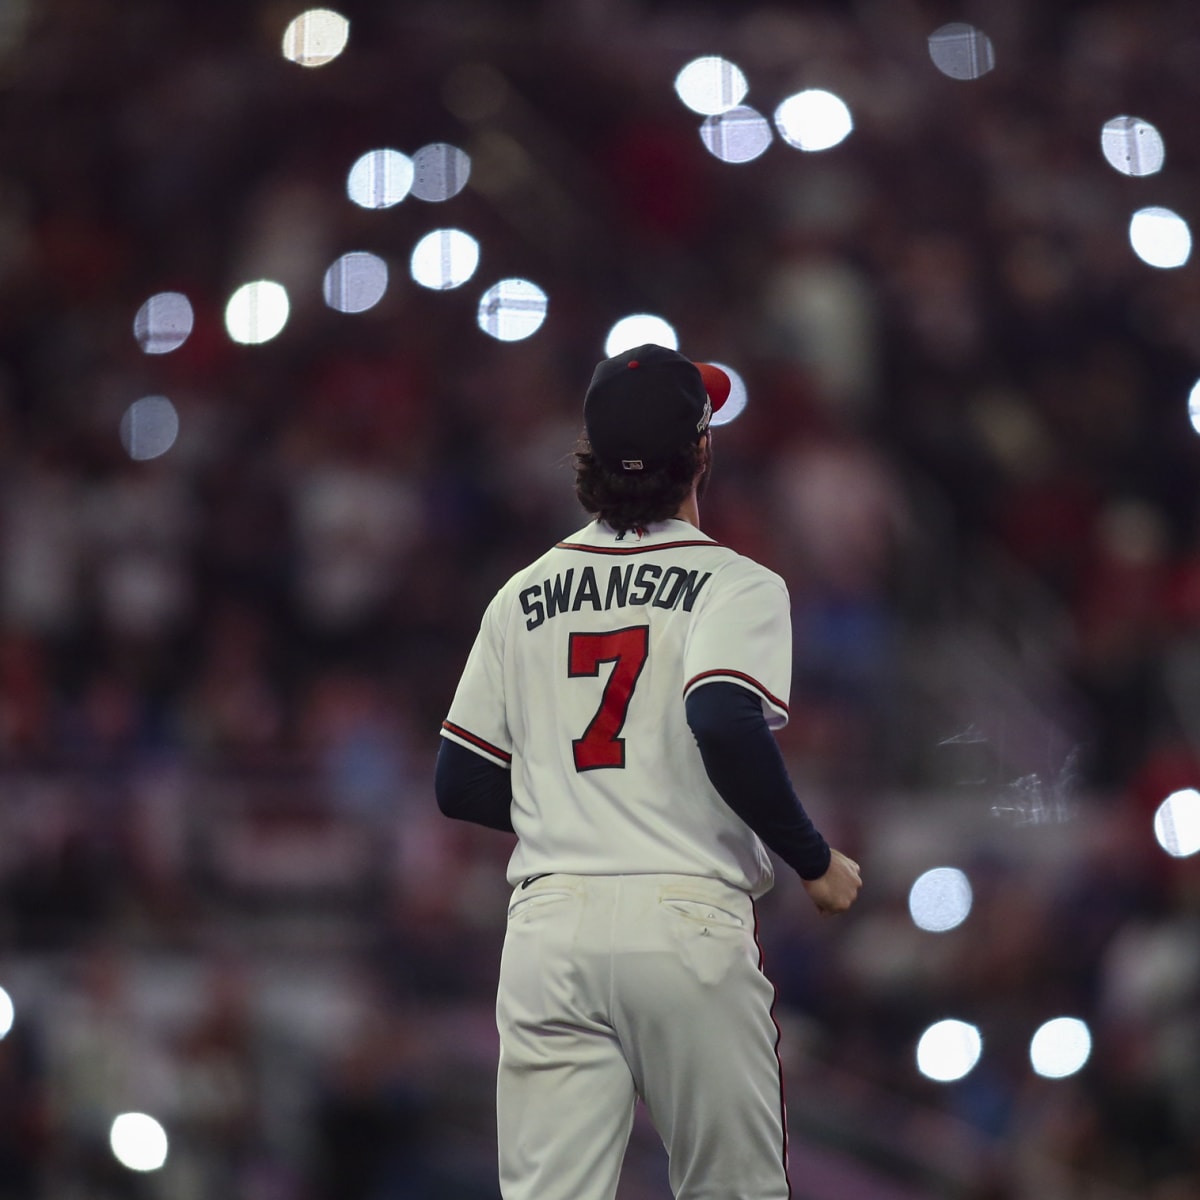 Dansby Swanson May Have Played Final Game with Atlanta Braves Saturday -  Fastball